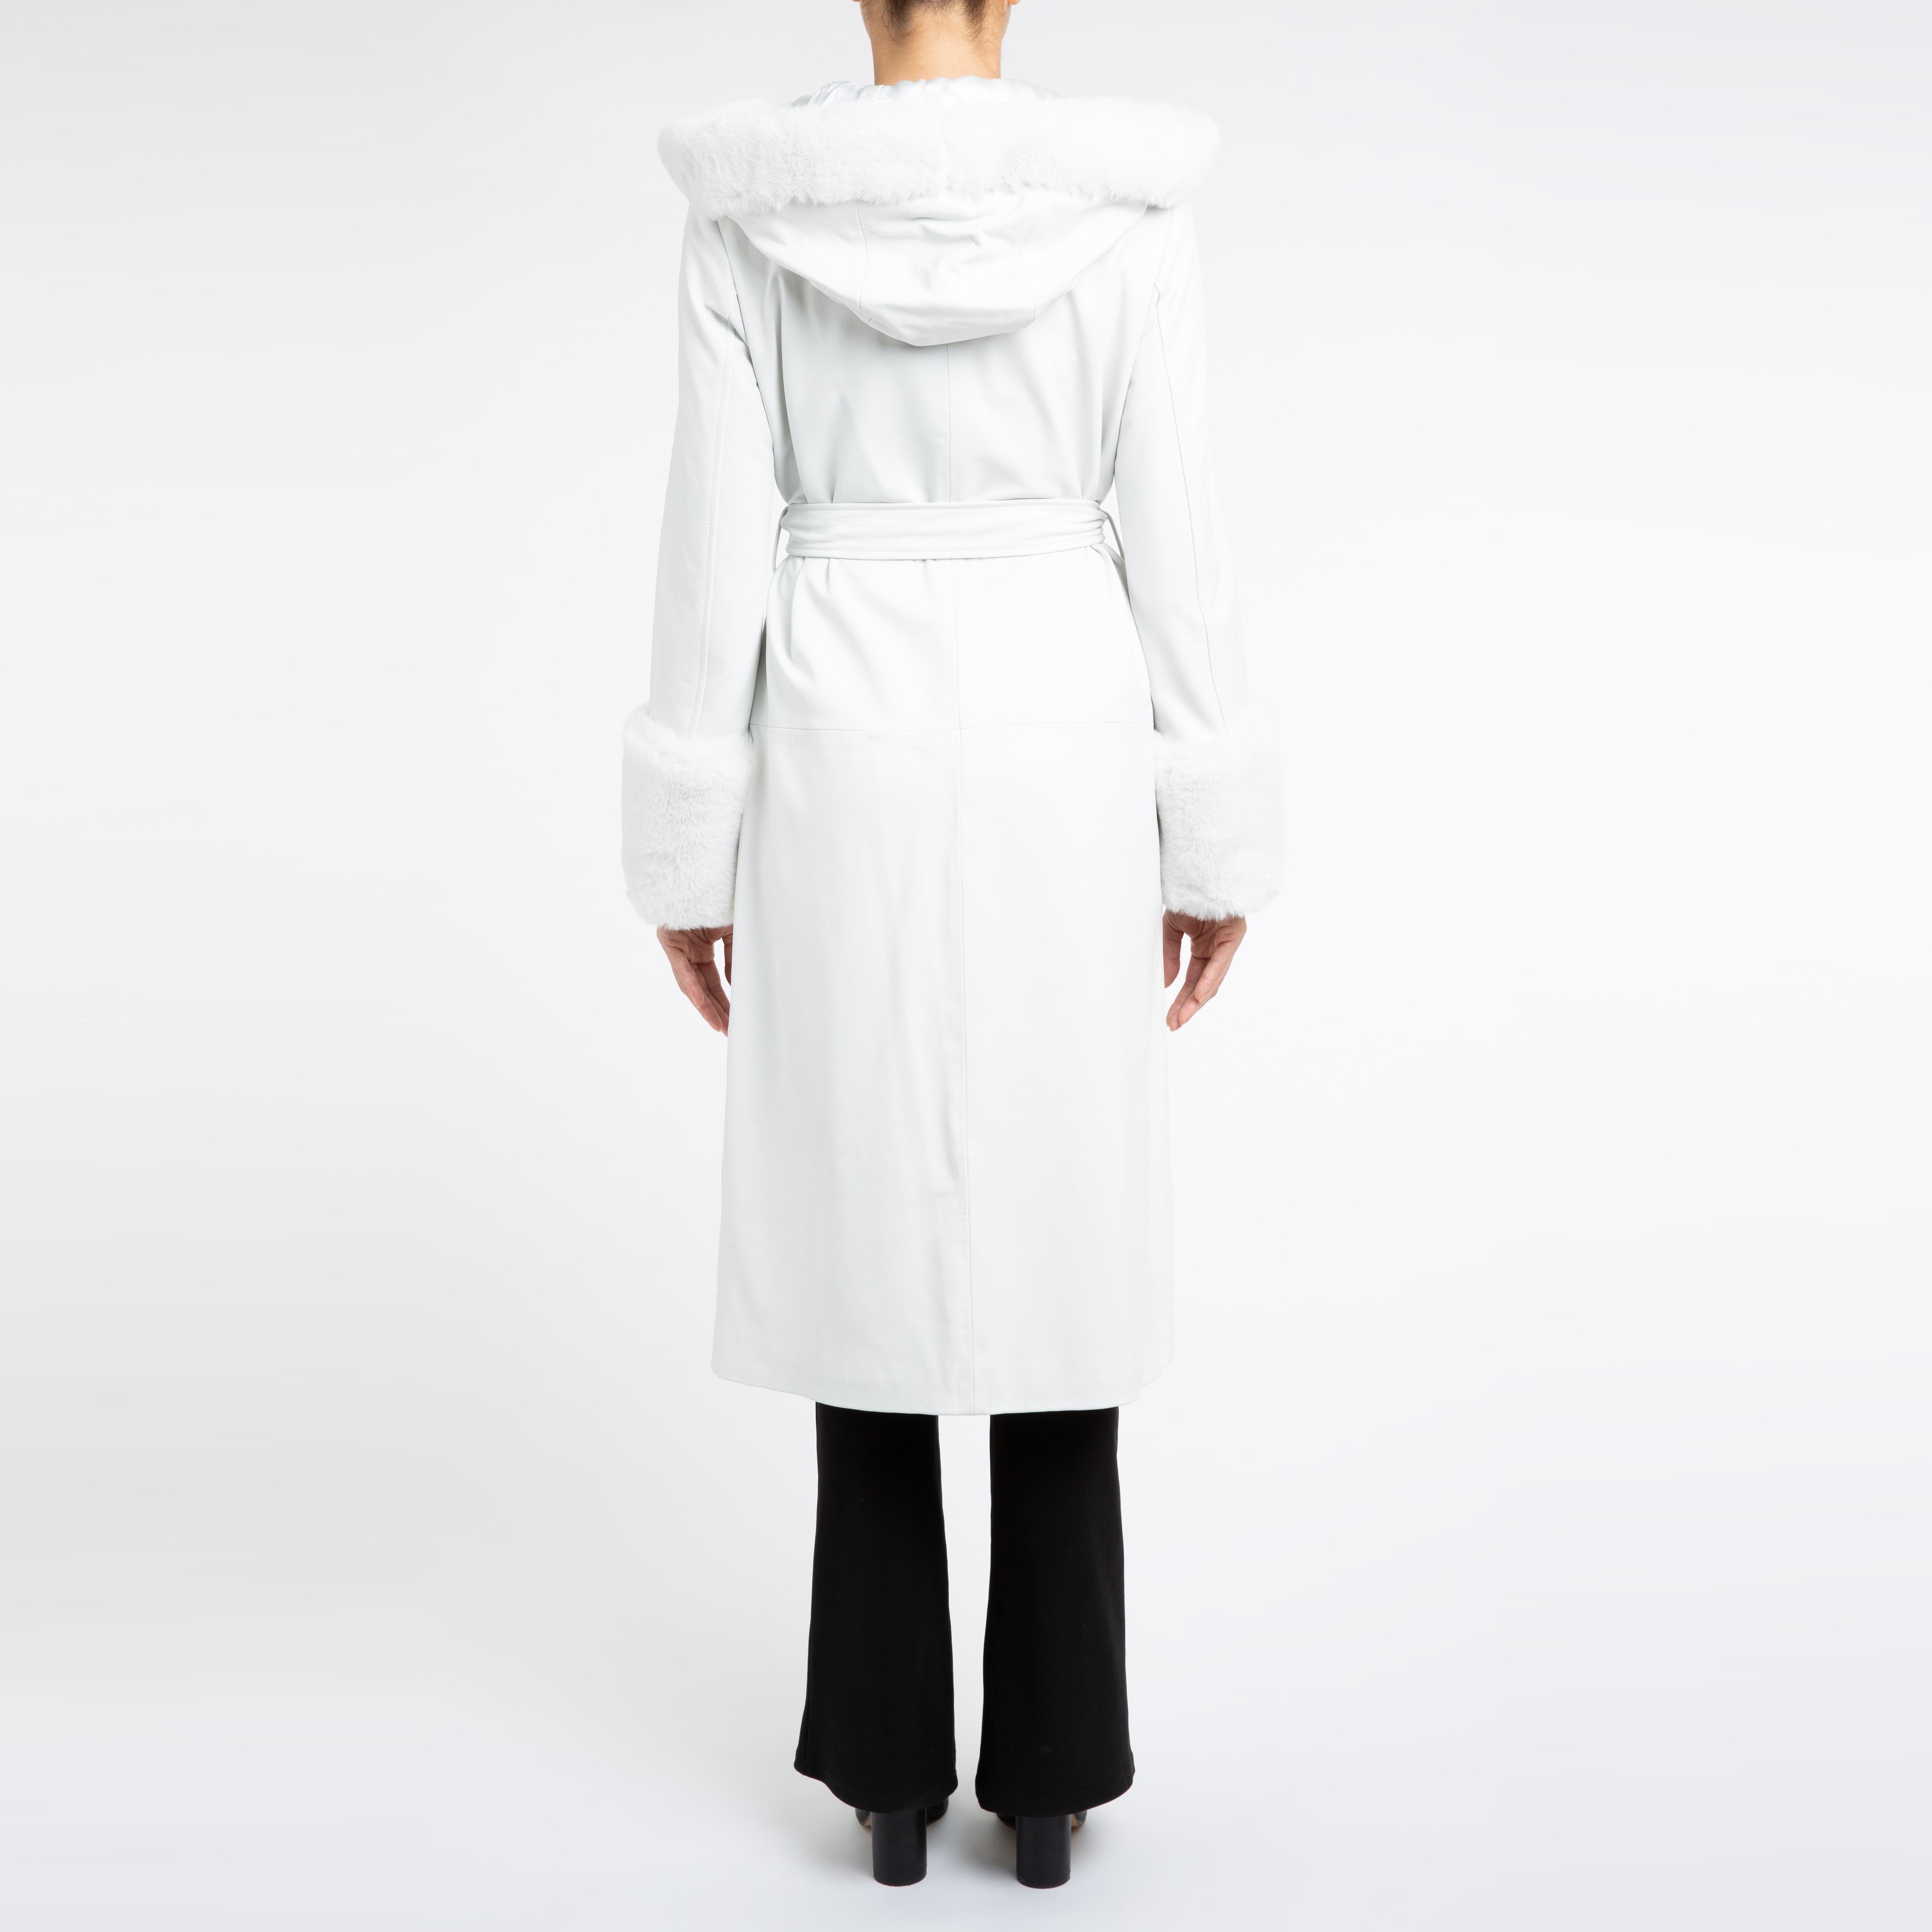 Verheyen Aurora Hooded Leather Trench Coat in White with Faux Fur - Size uk 10 For Sale 3